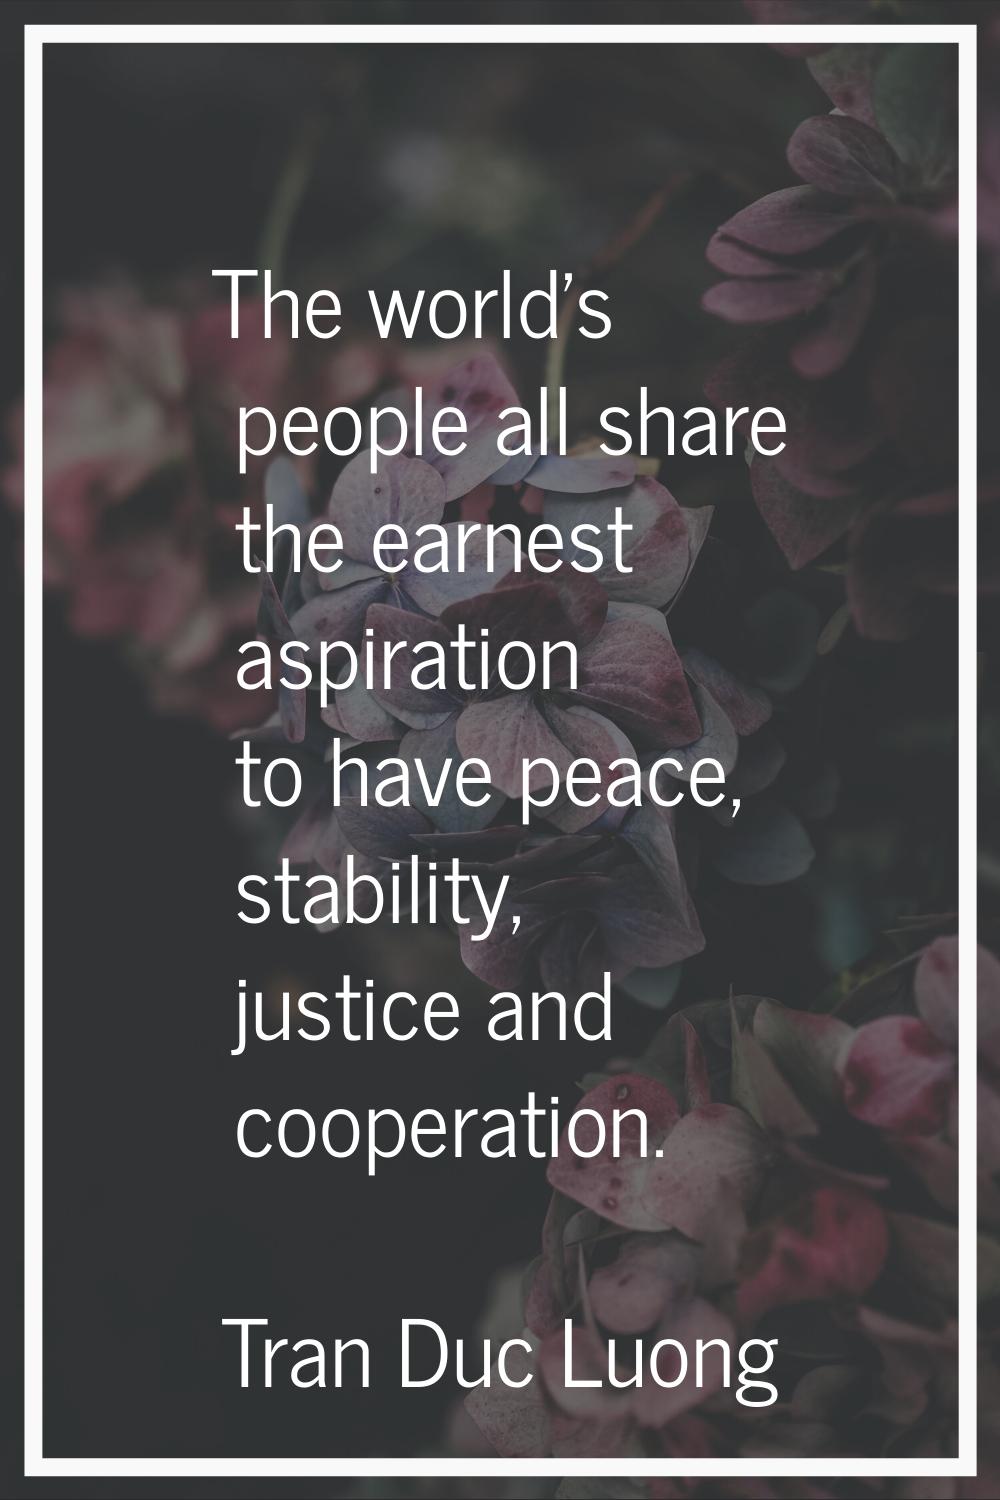 The world's people all share the earnest aspiration to have peace, stability, justice and cooperati